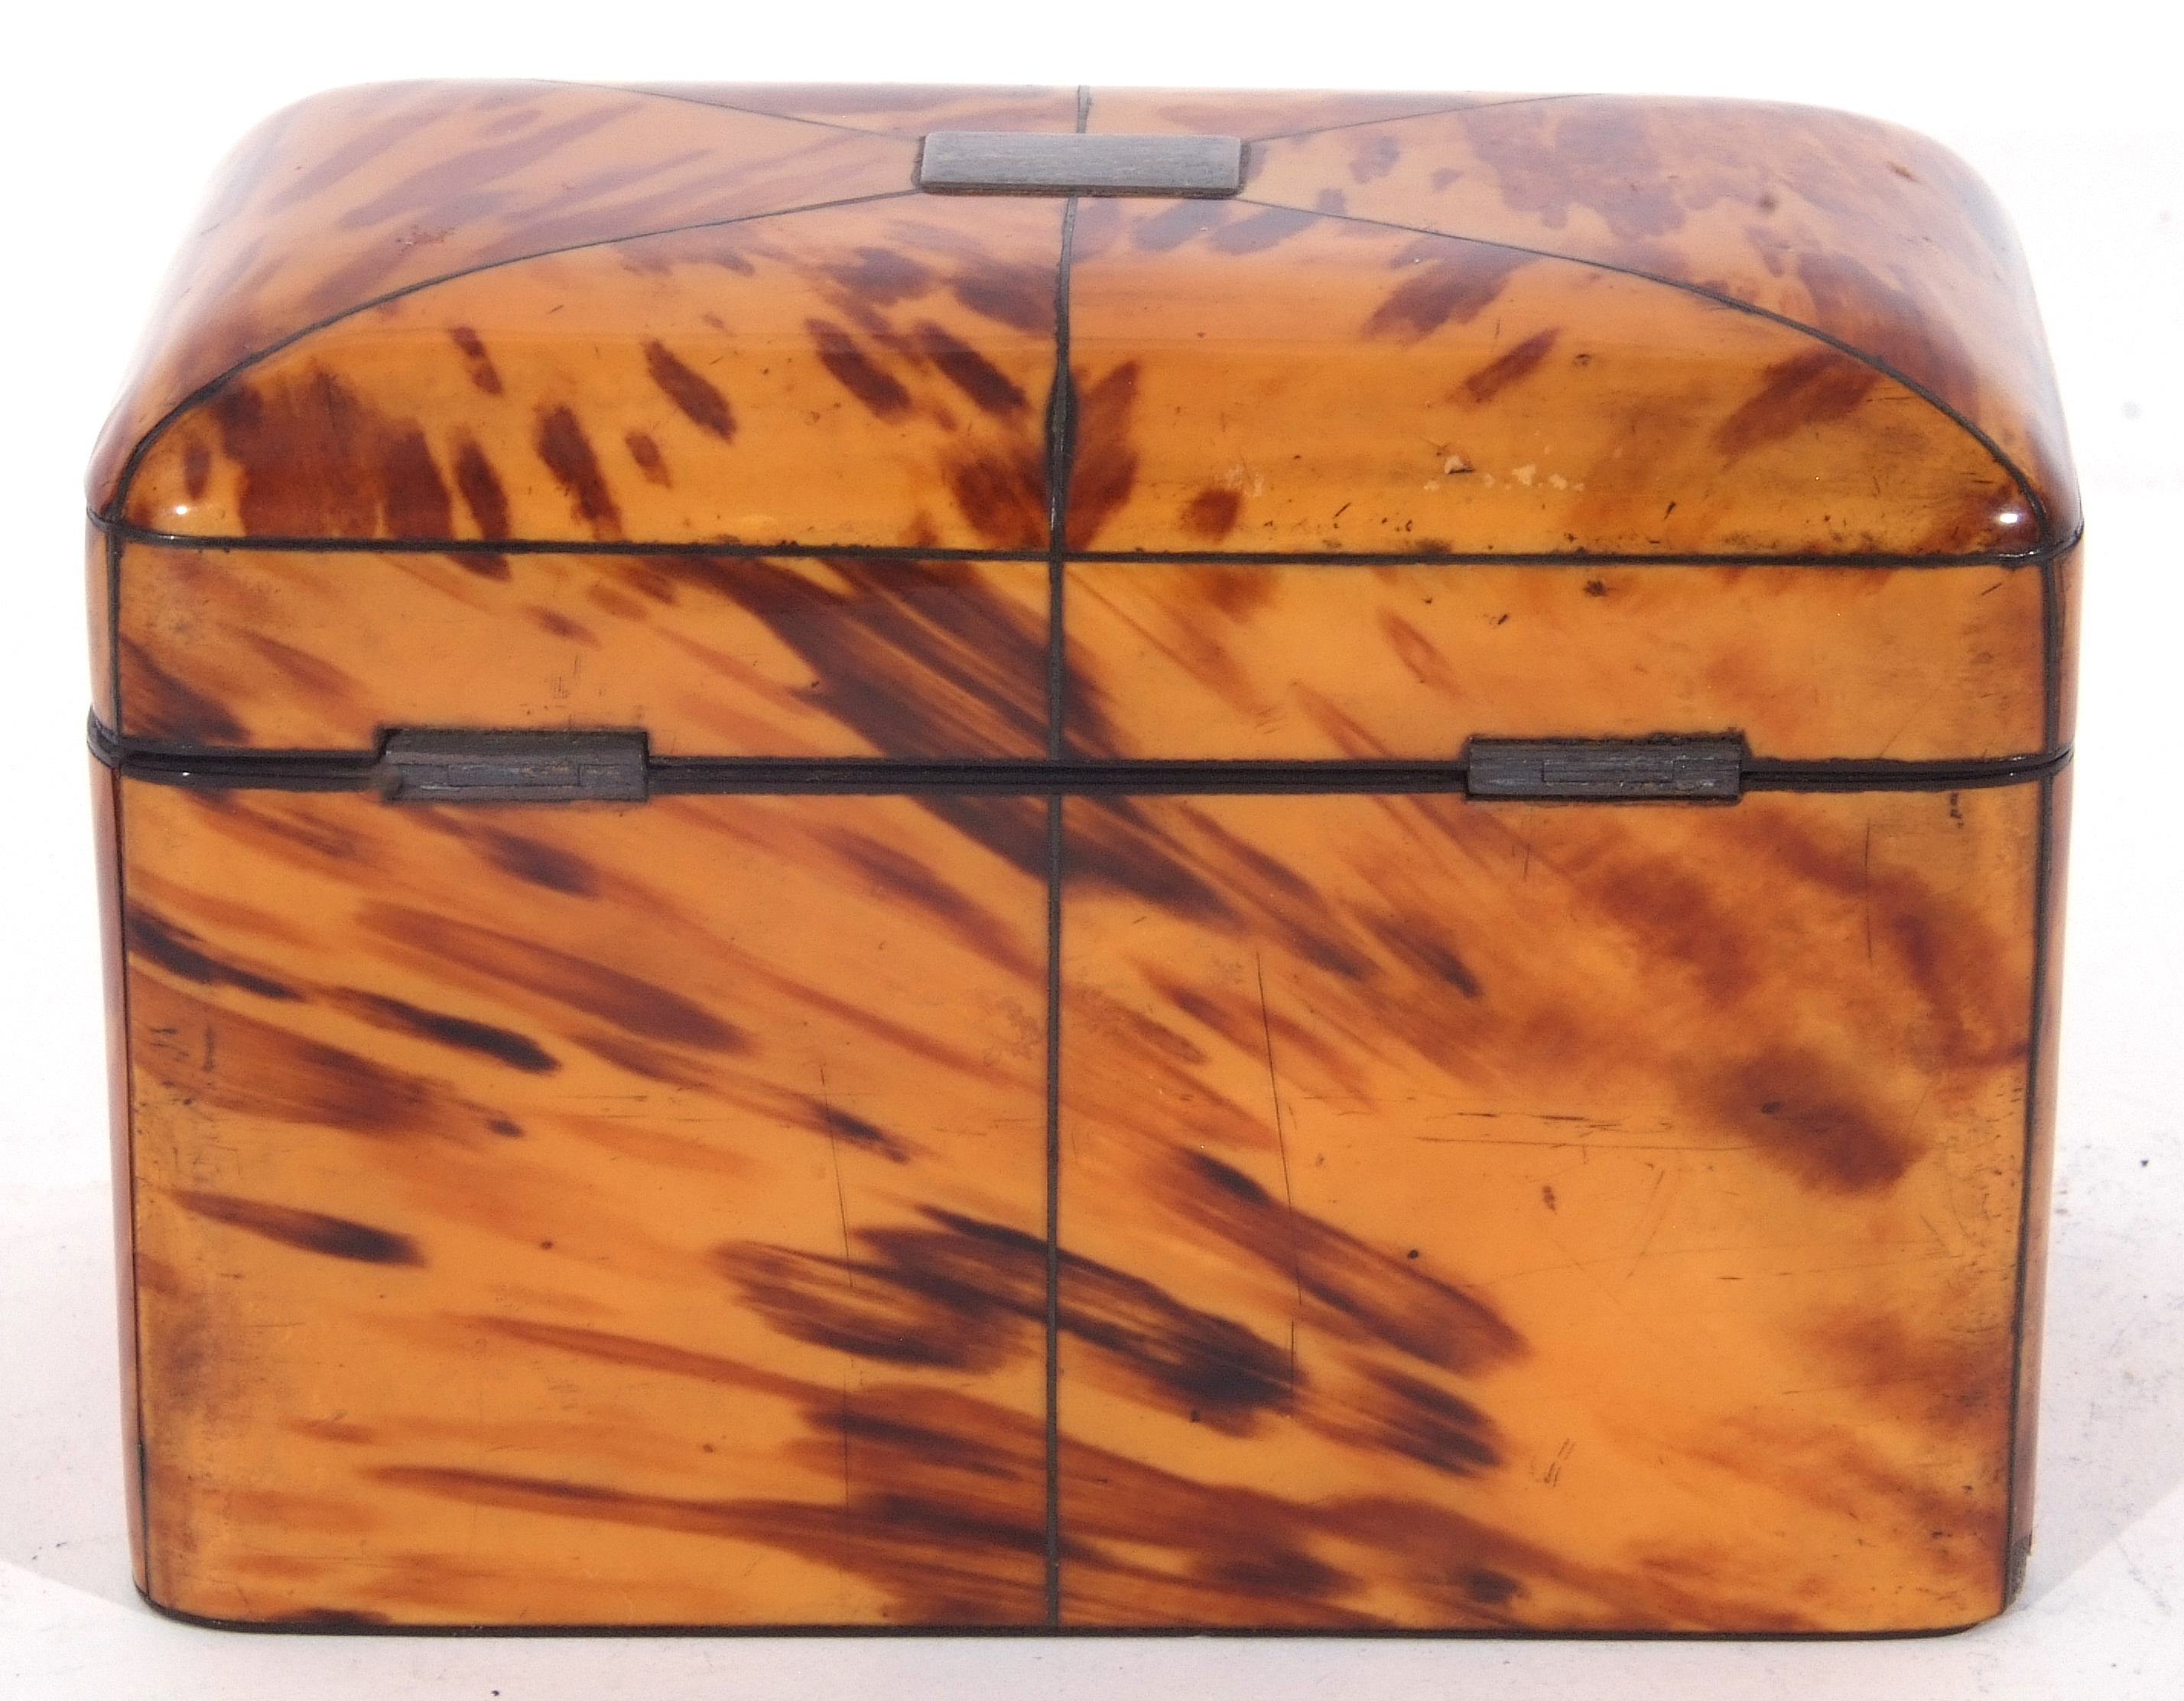 Mid-19th century tortoiseshell veneered tea caddy with pewter divisional inlays, the lid opening - Image 9 of 11